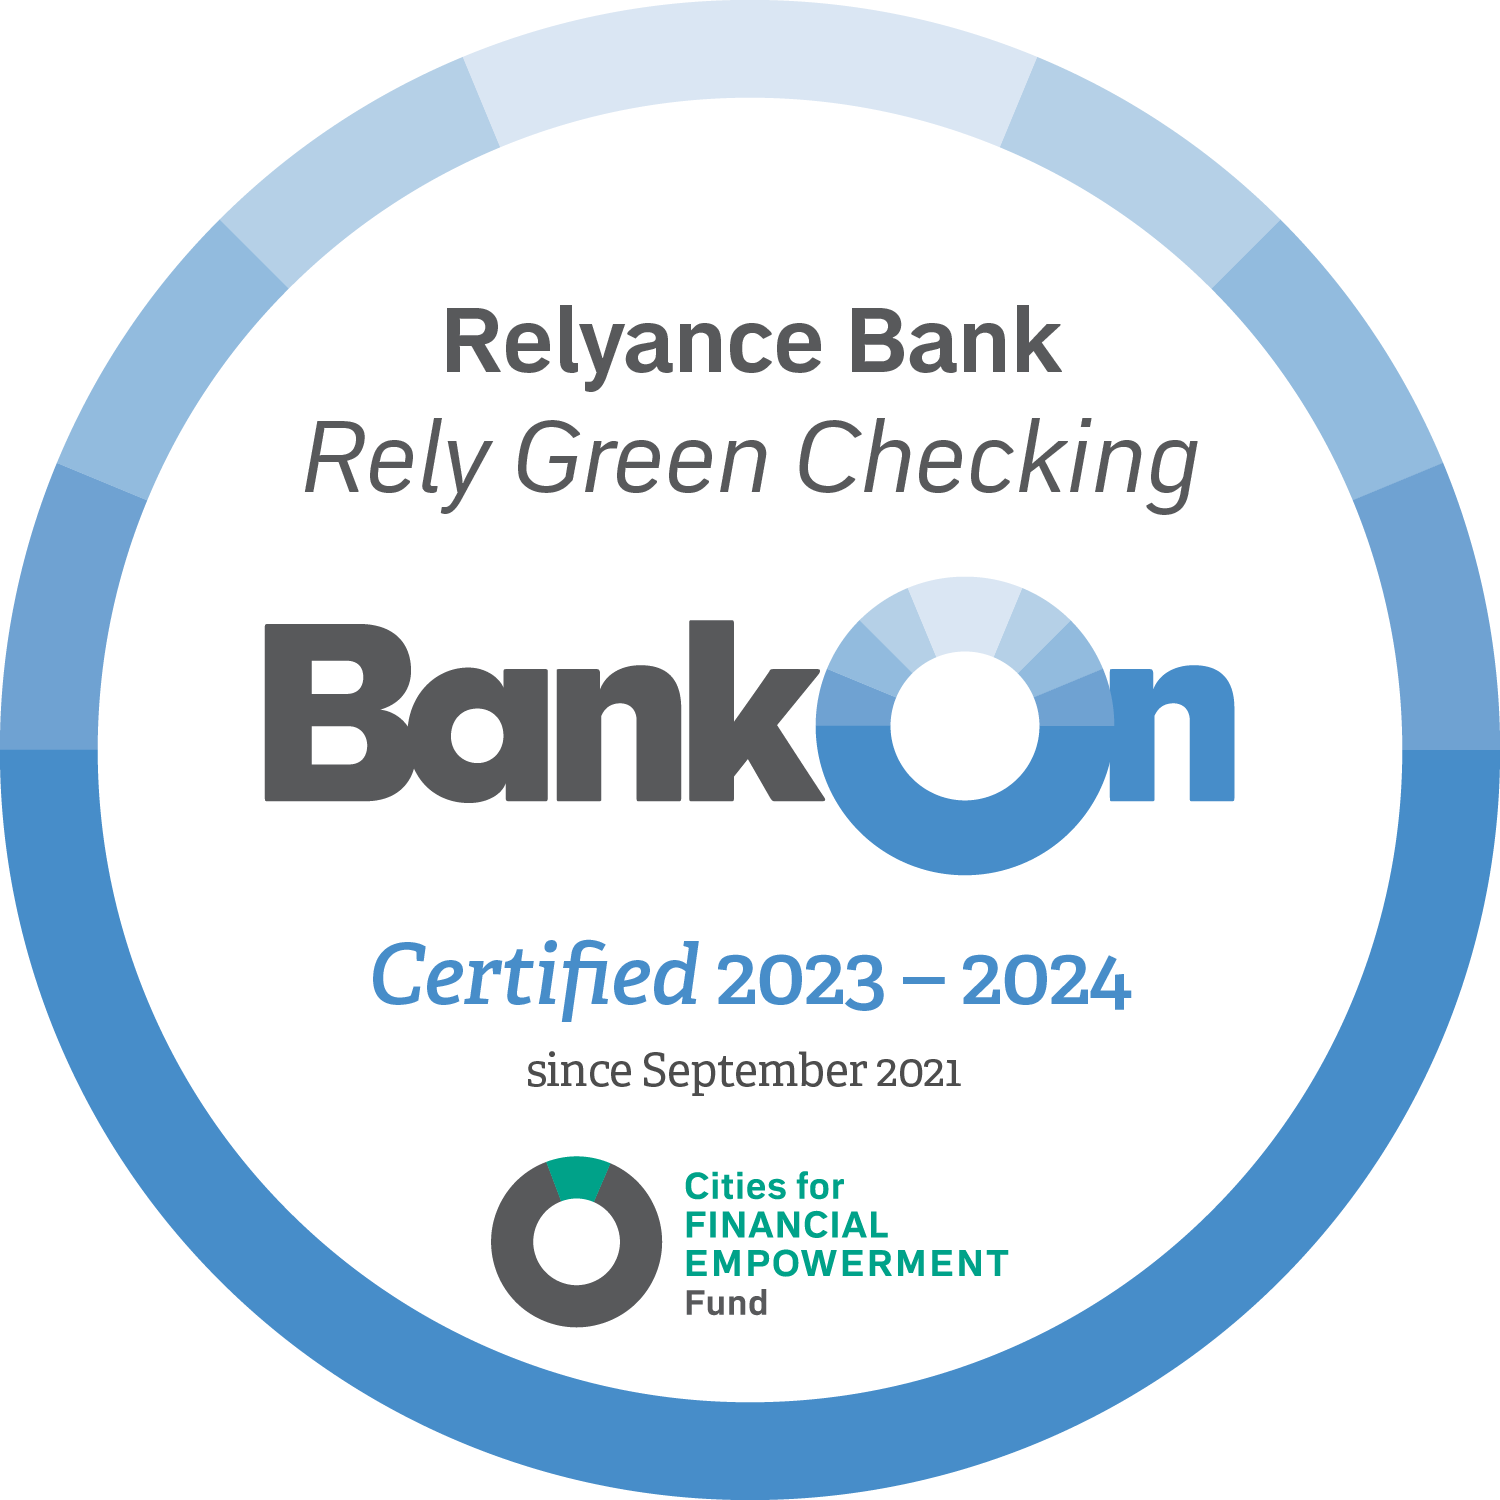 Relyance Bank Rely Green Checking BankOn National Account Standards 2023-2024 Approved certified since September 2021 Cities for Financial Empowerment Fund